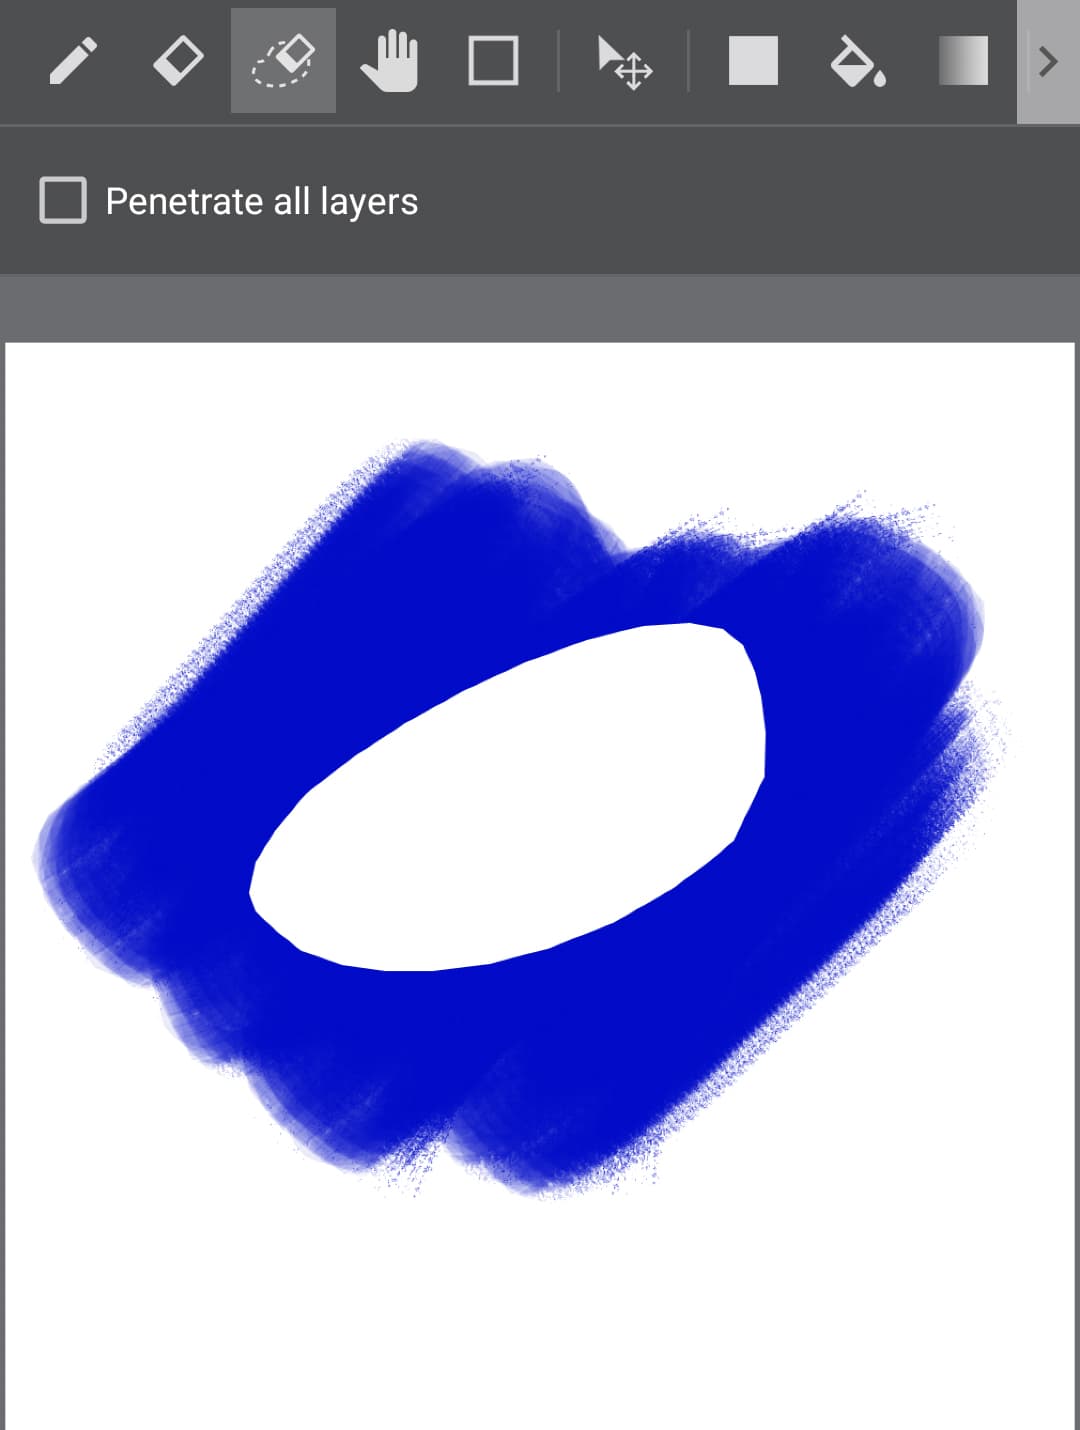 [android] How to Use the Eraser(Lasso) Tool